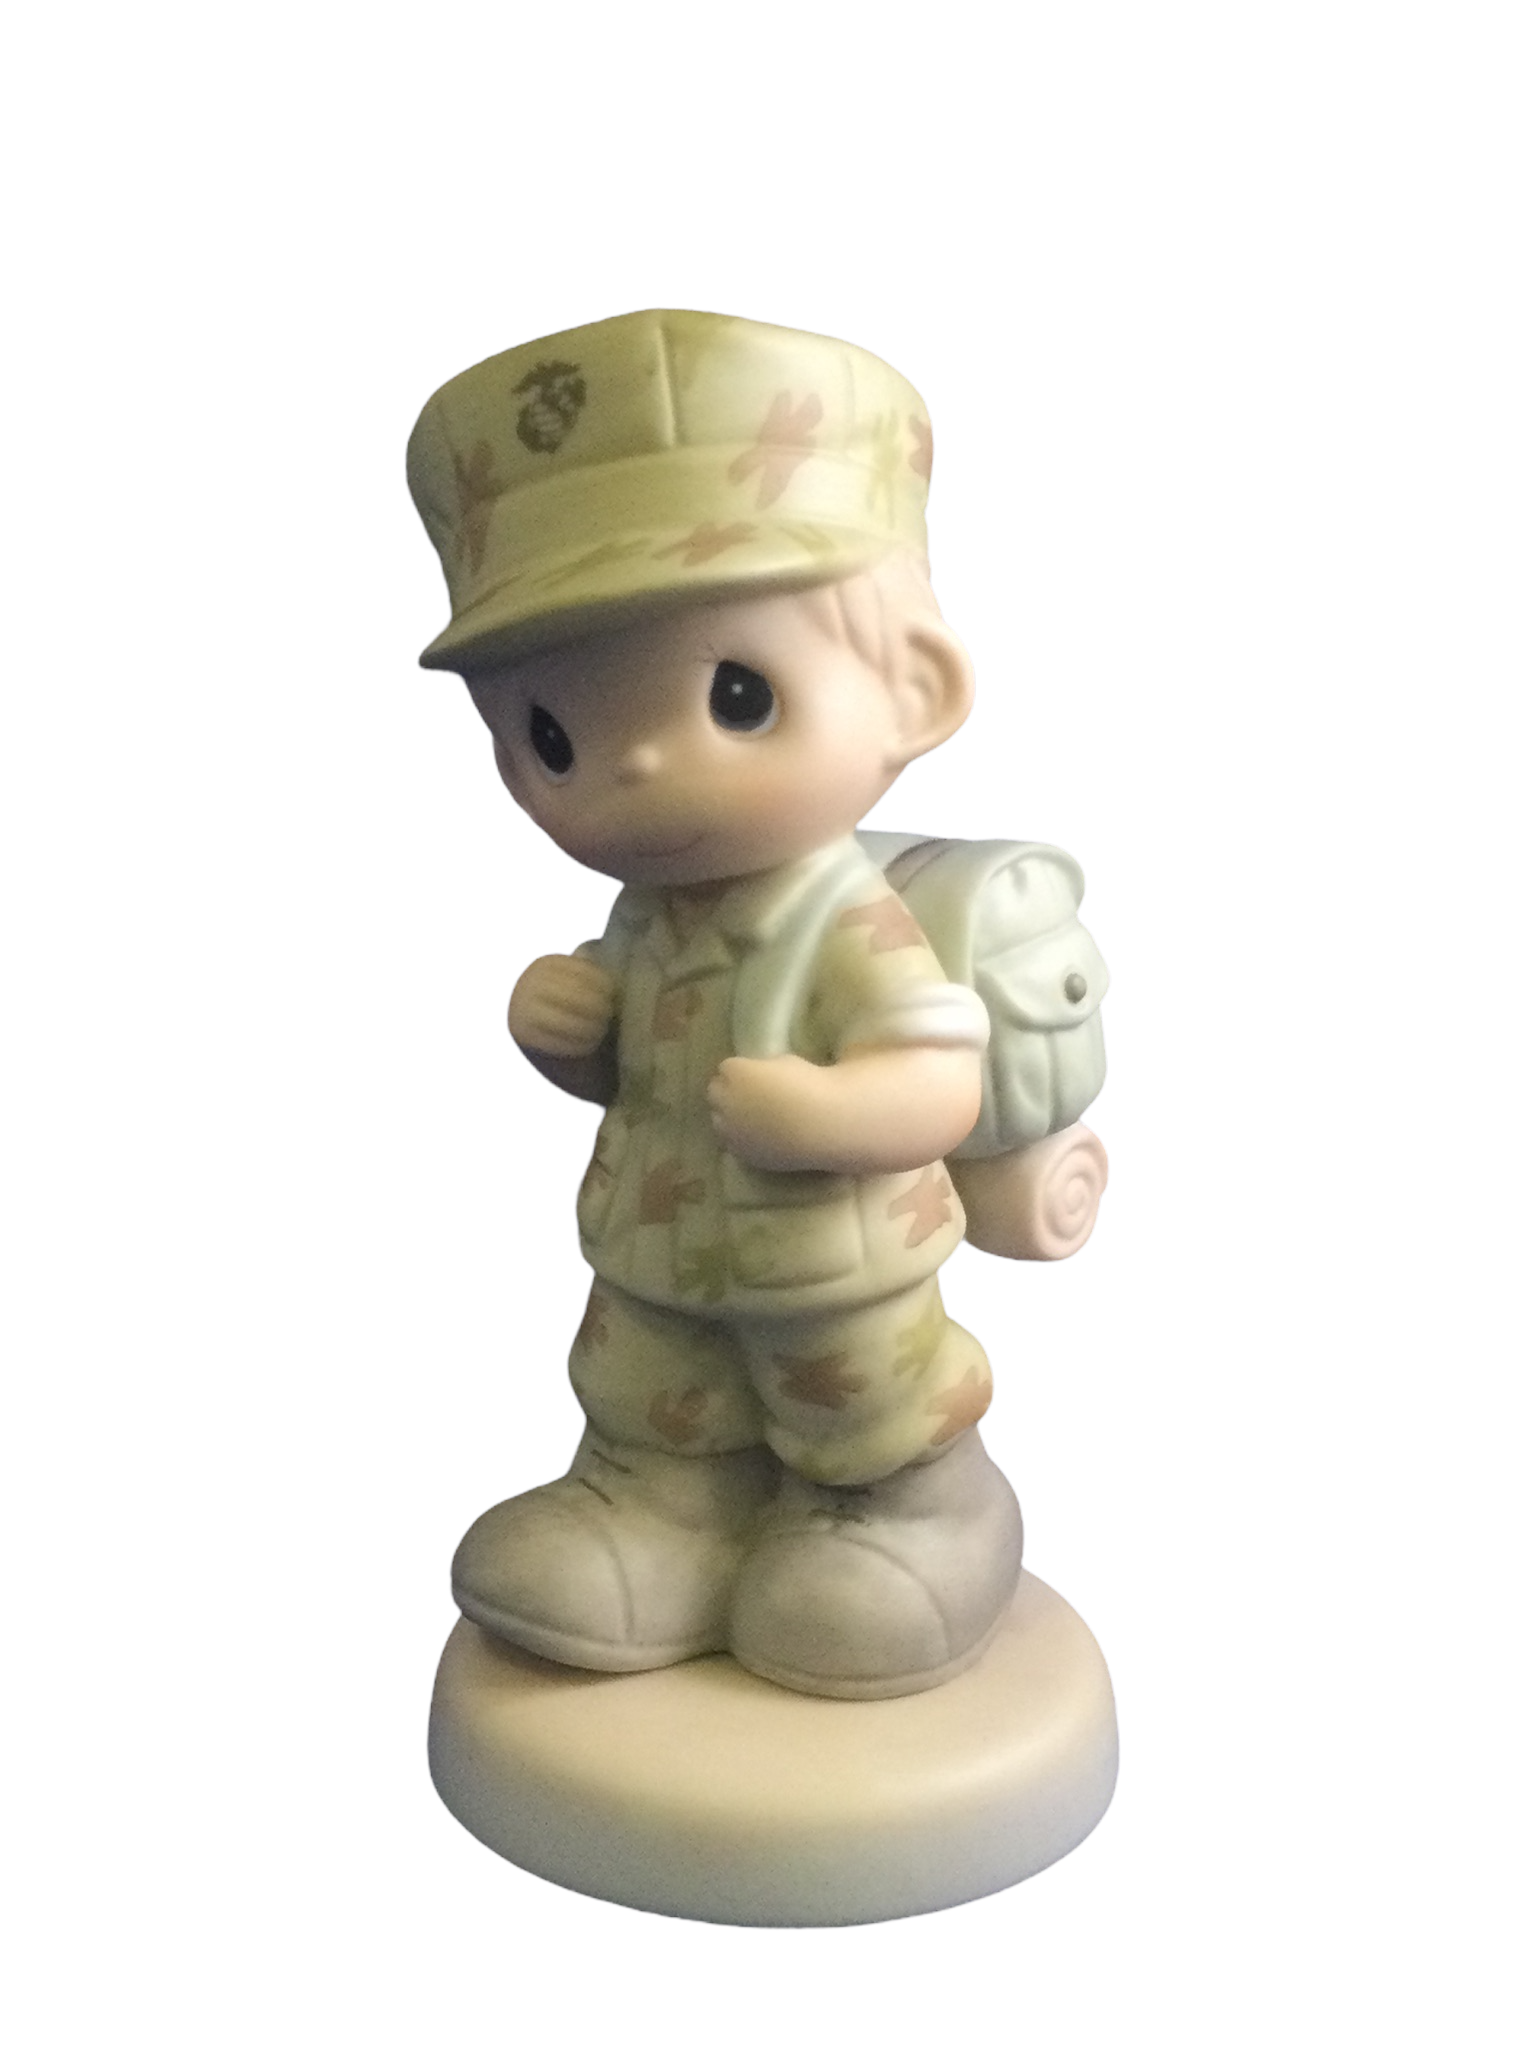 I'm Proud To Be An American  - Marine - Precious Moment Figurine